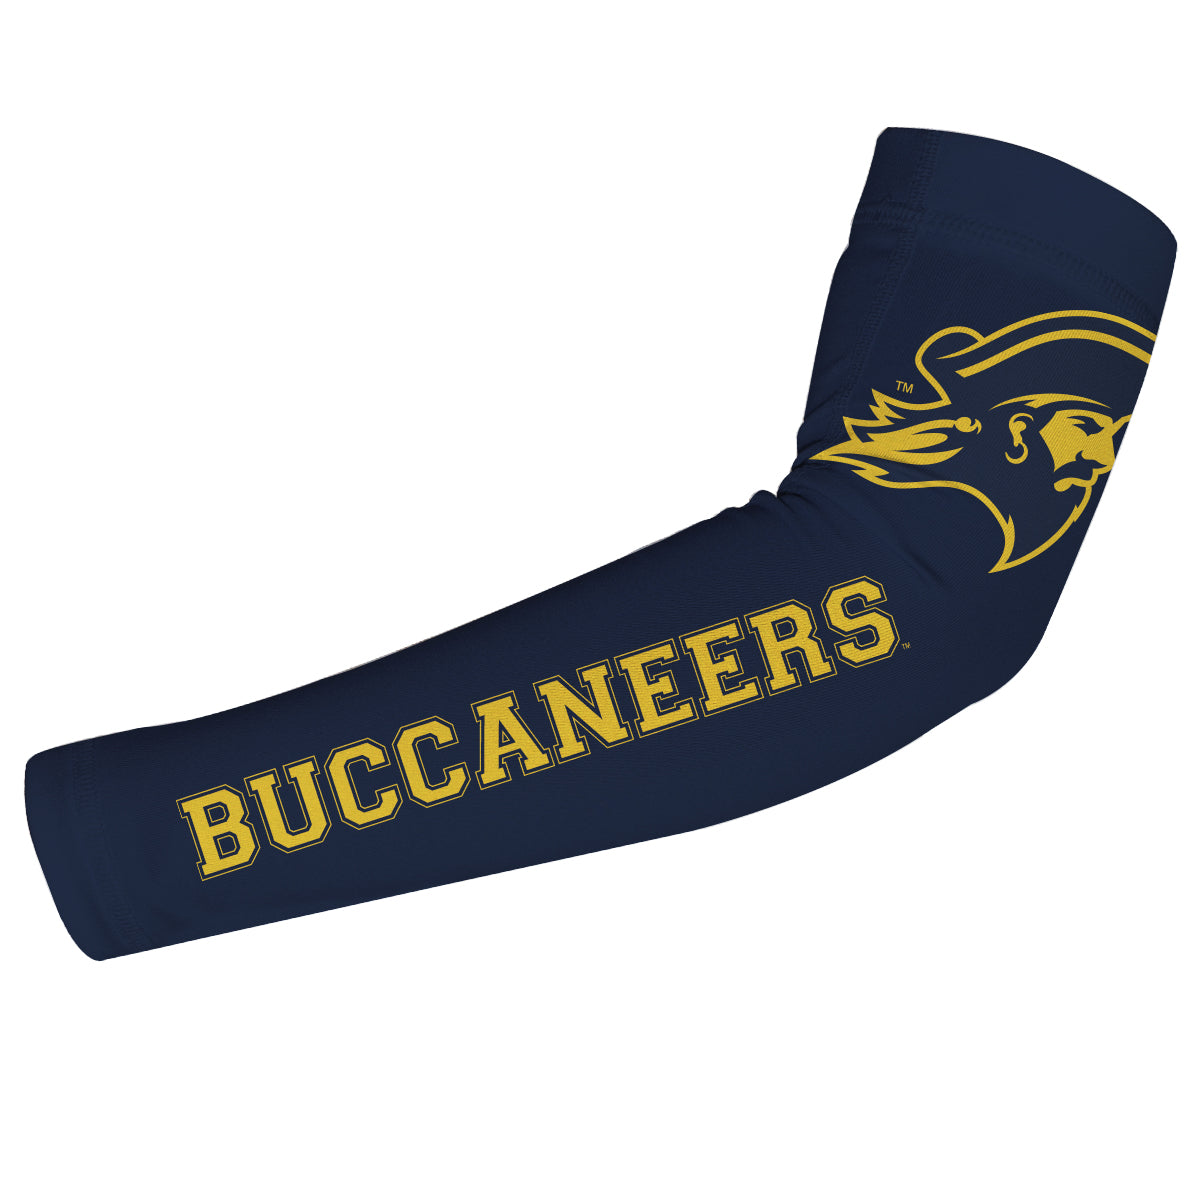 East Tennessee State Blue Arm Sleeves Pair - Vive La F̻te - Online Apparel Store